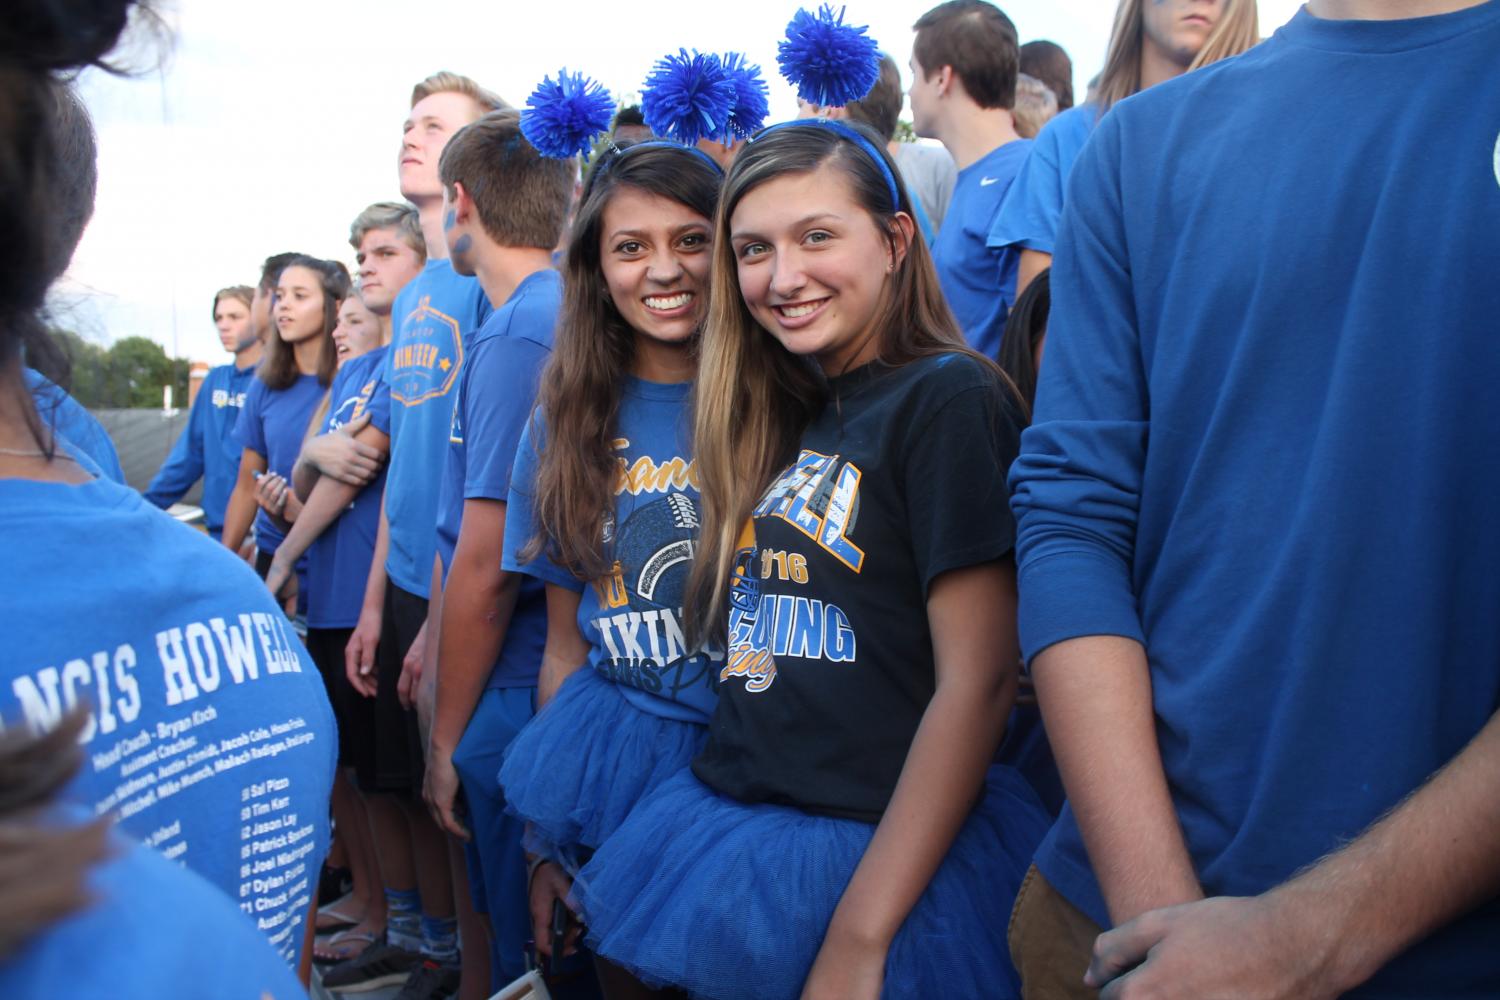 Dressed in blue from head-to-toe, juniors Sophia Rizzo and Kennedy Brewer smile for the camera at the first home football game. Rizzo and Brewer stood in the superfan section wearing matching tutus and headbands at the blue-out game on Aug. 18. “I love how our school is so hype and all for school spirit,” Rizzo said.